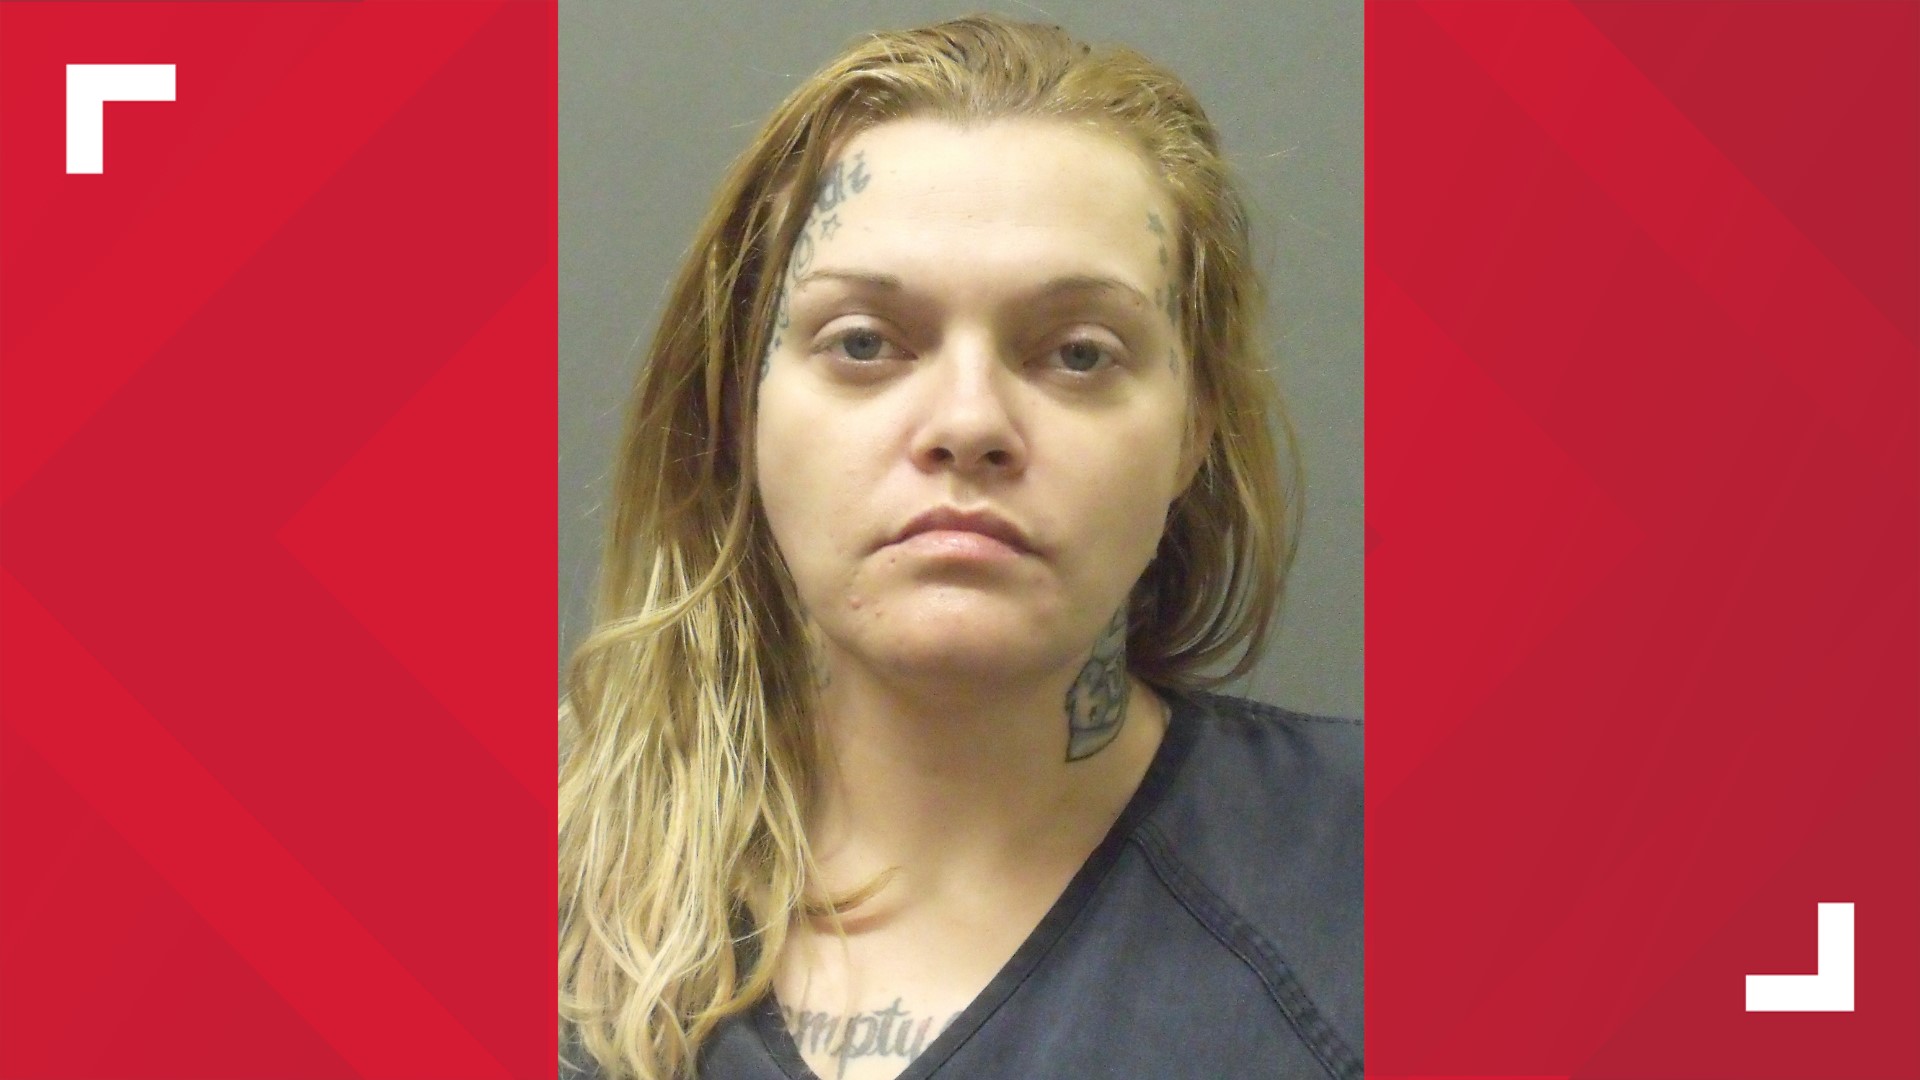 Candice Jones pleaded guilty for her part in the murder of a woman whose body was found in a shallow grave in 2017.